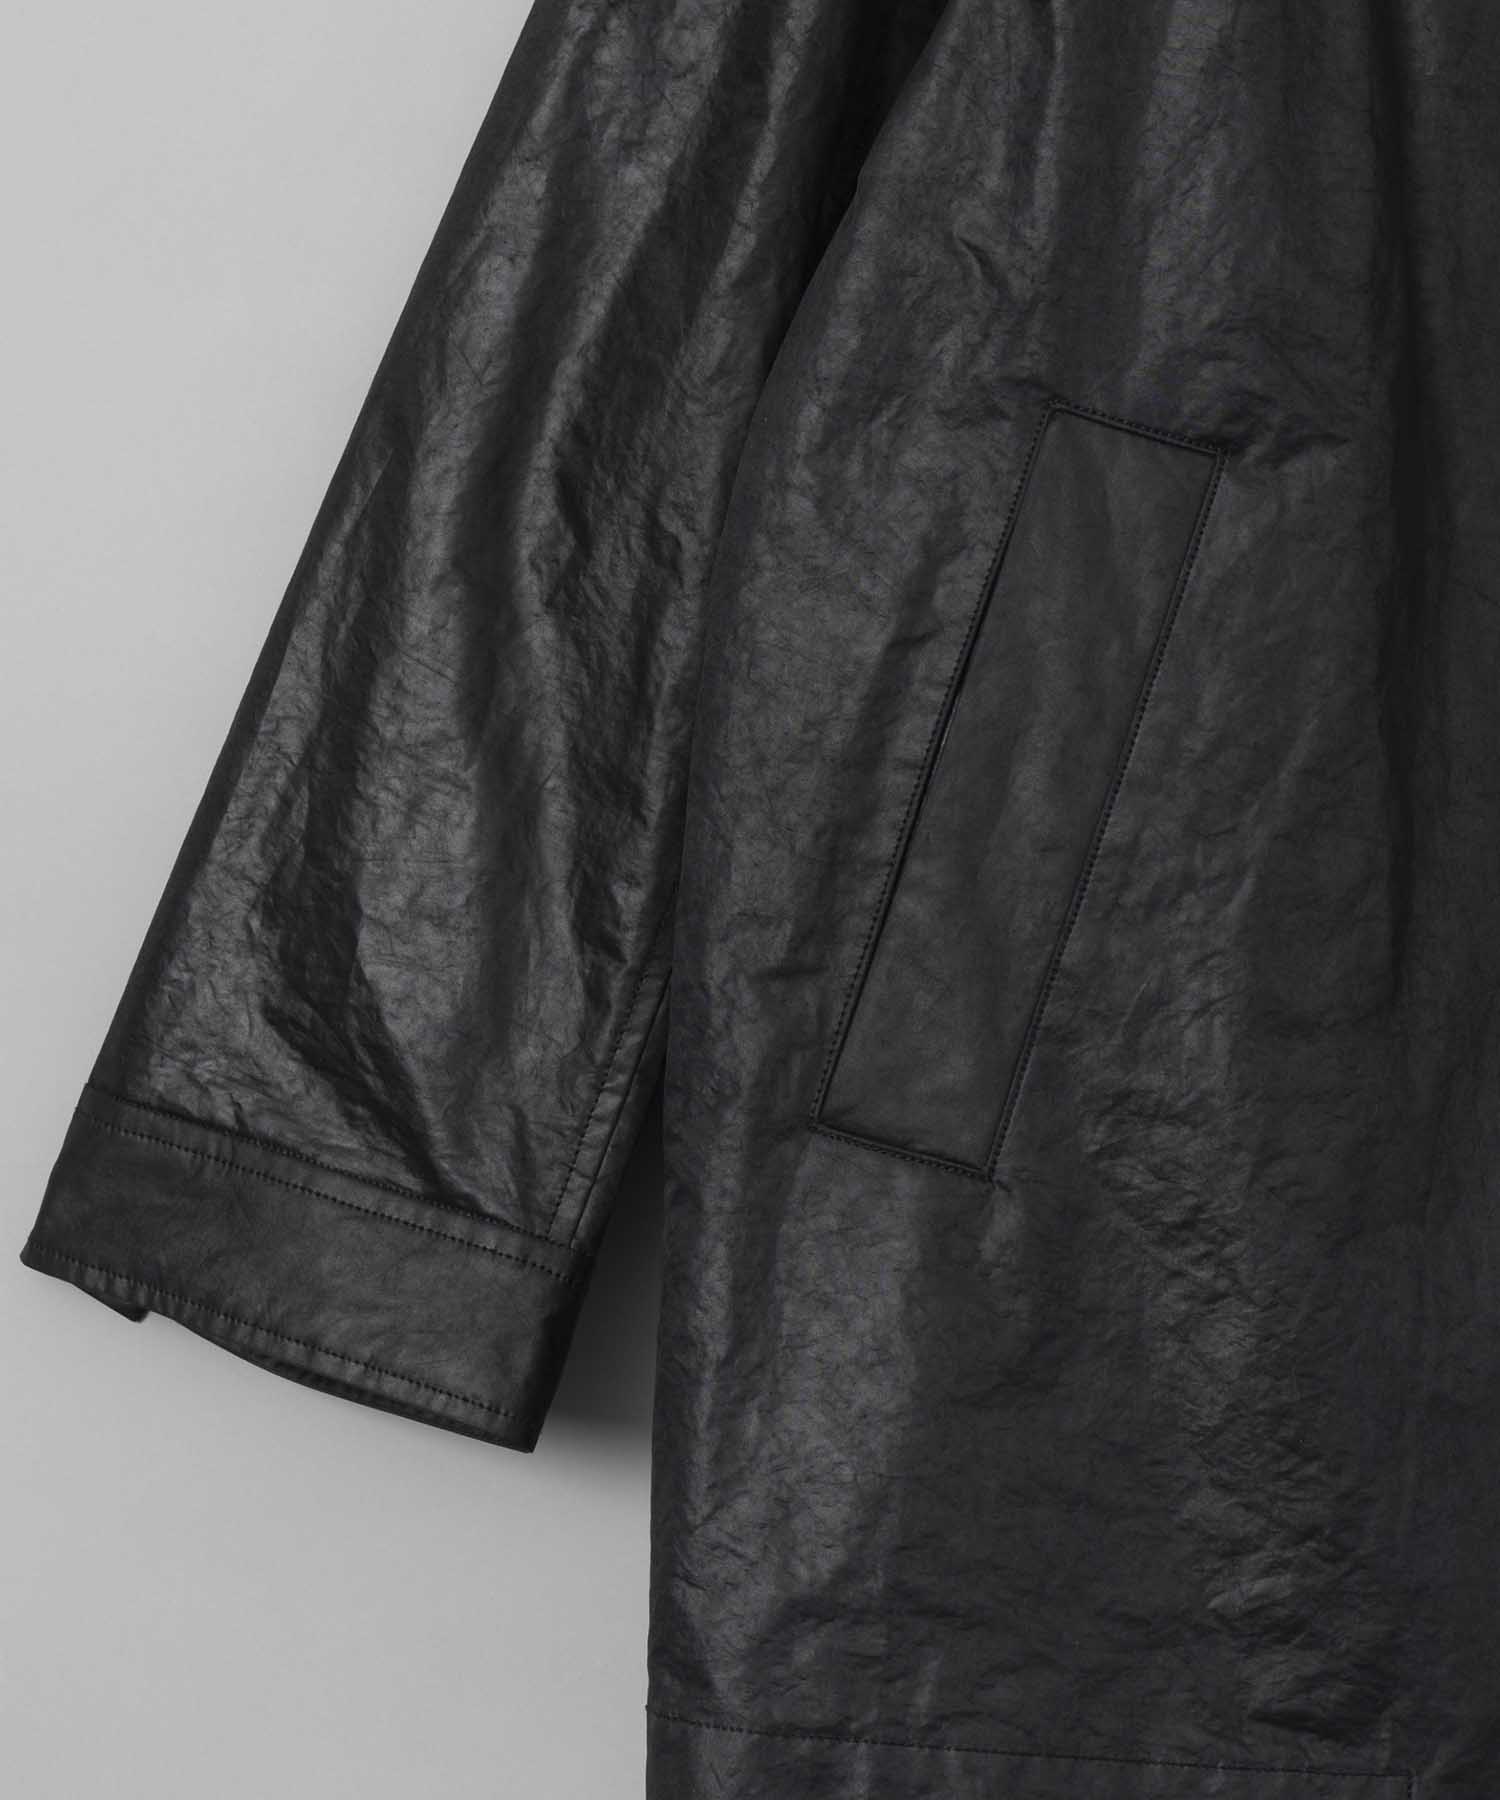 【LIMITED EDITION】Dress-Over Car Coat